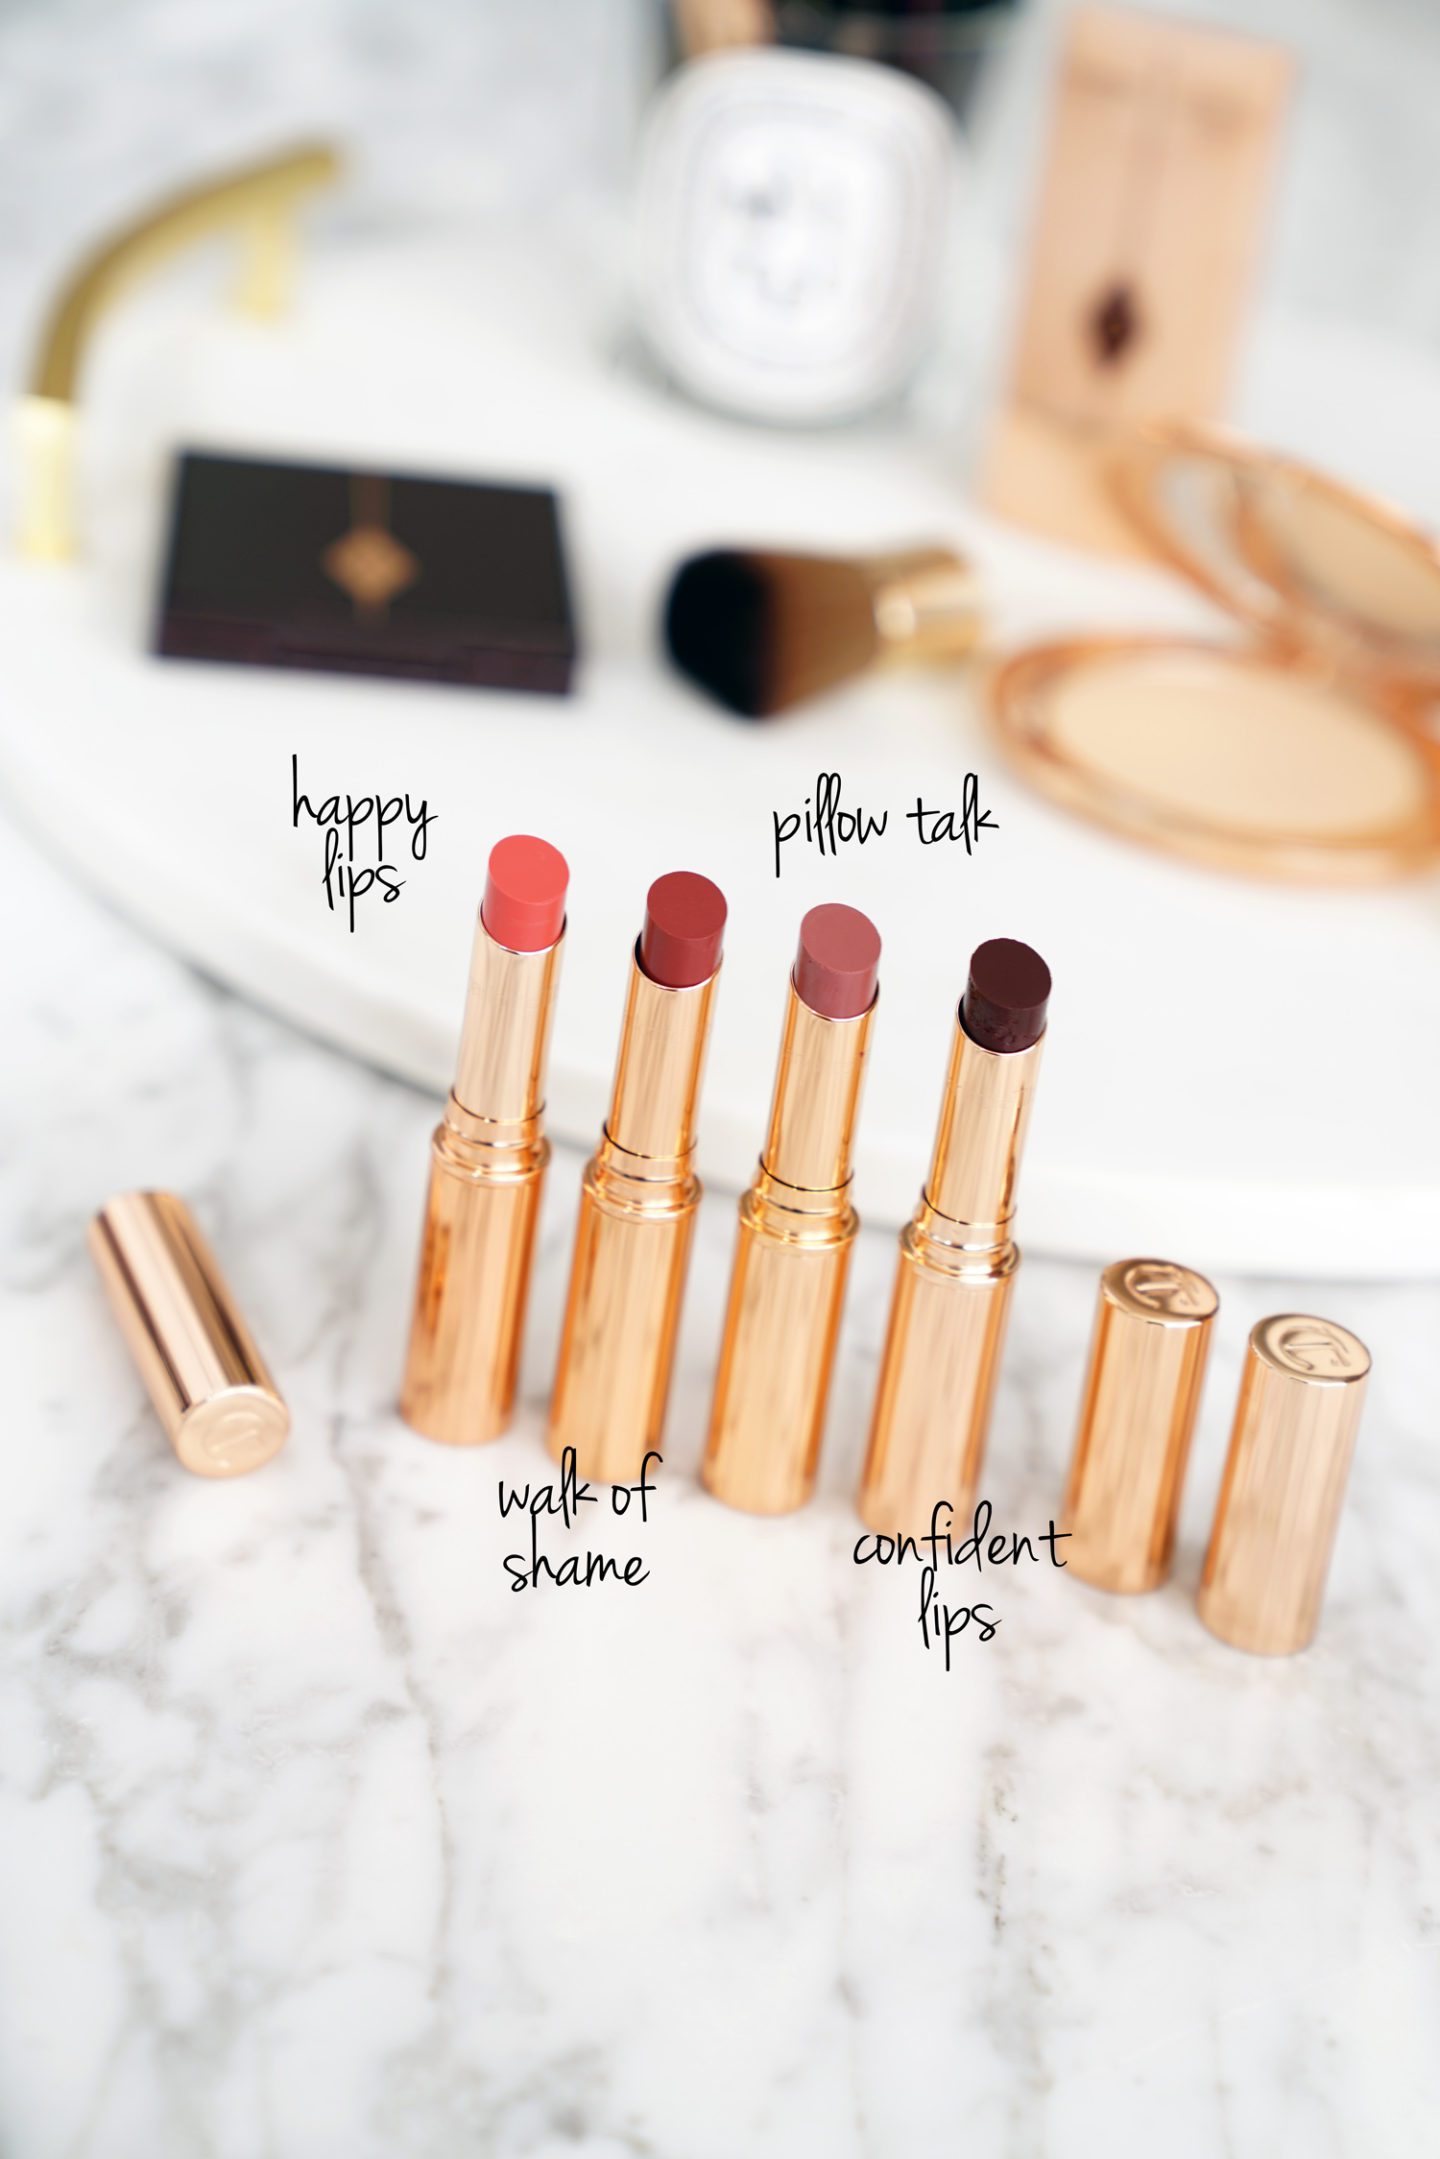 Charlotte Tilbury Superstar Lips Happy Lips, Walk of Shame, Pillow Talk and Confident Lips review